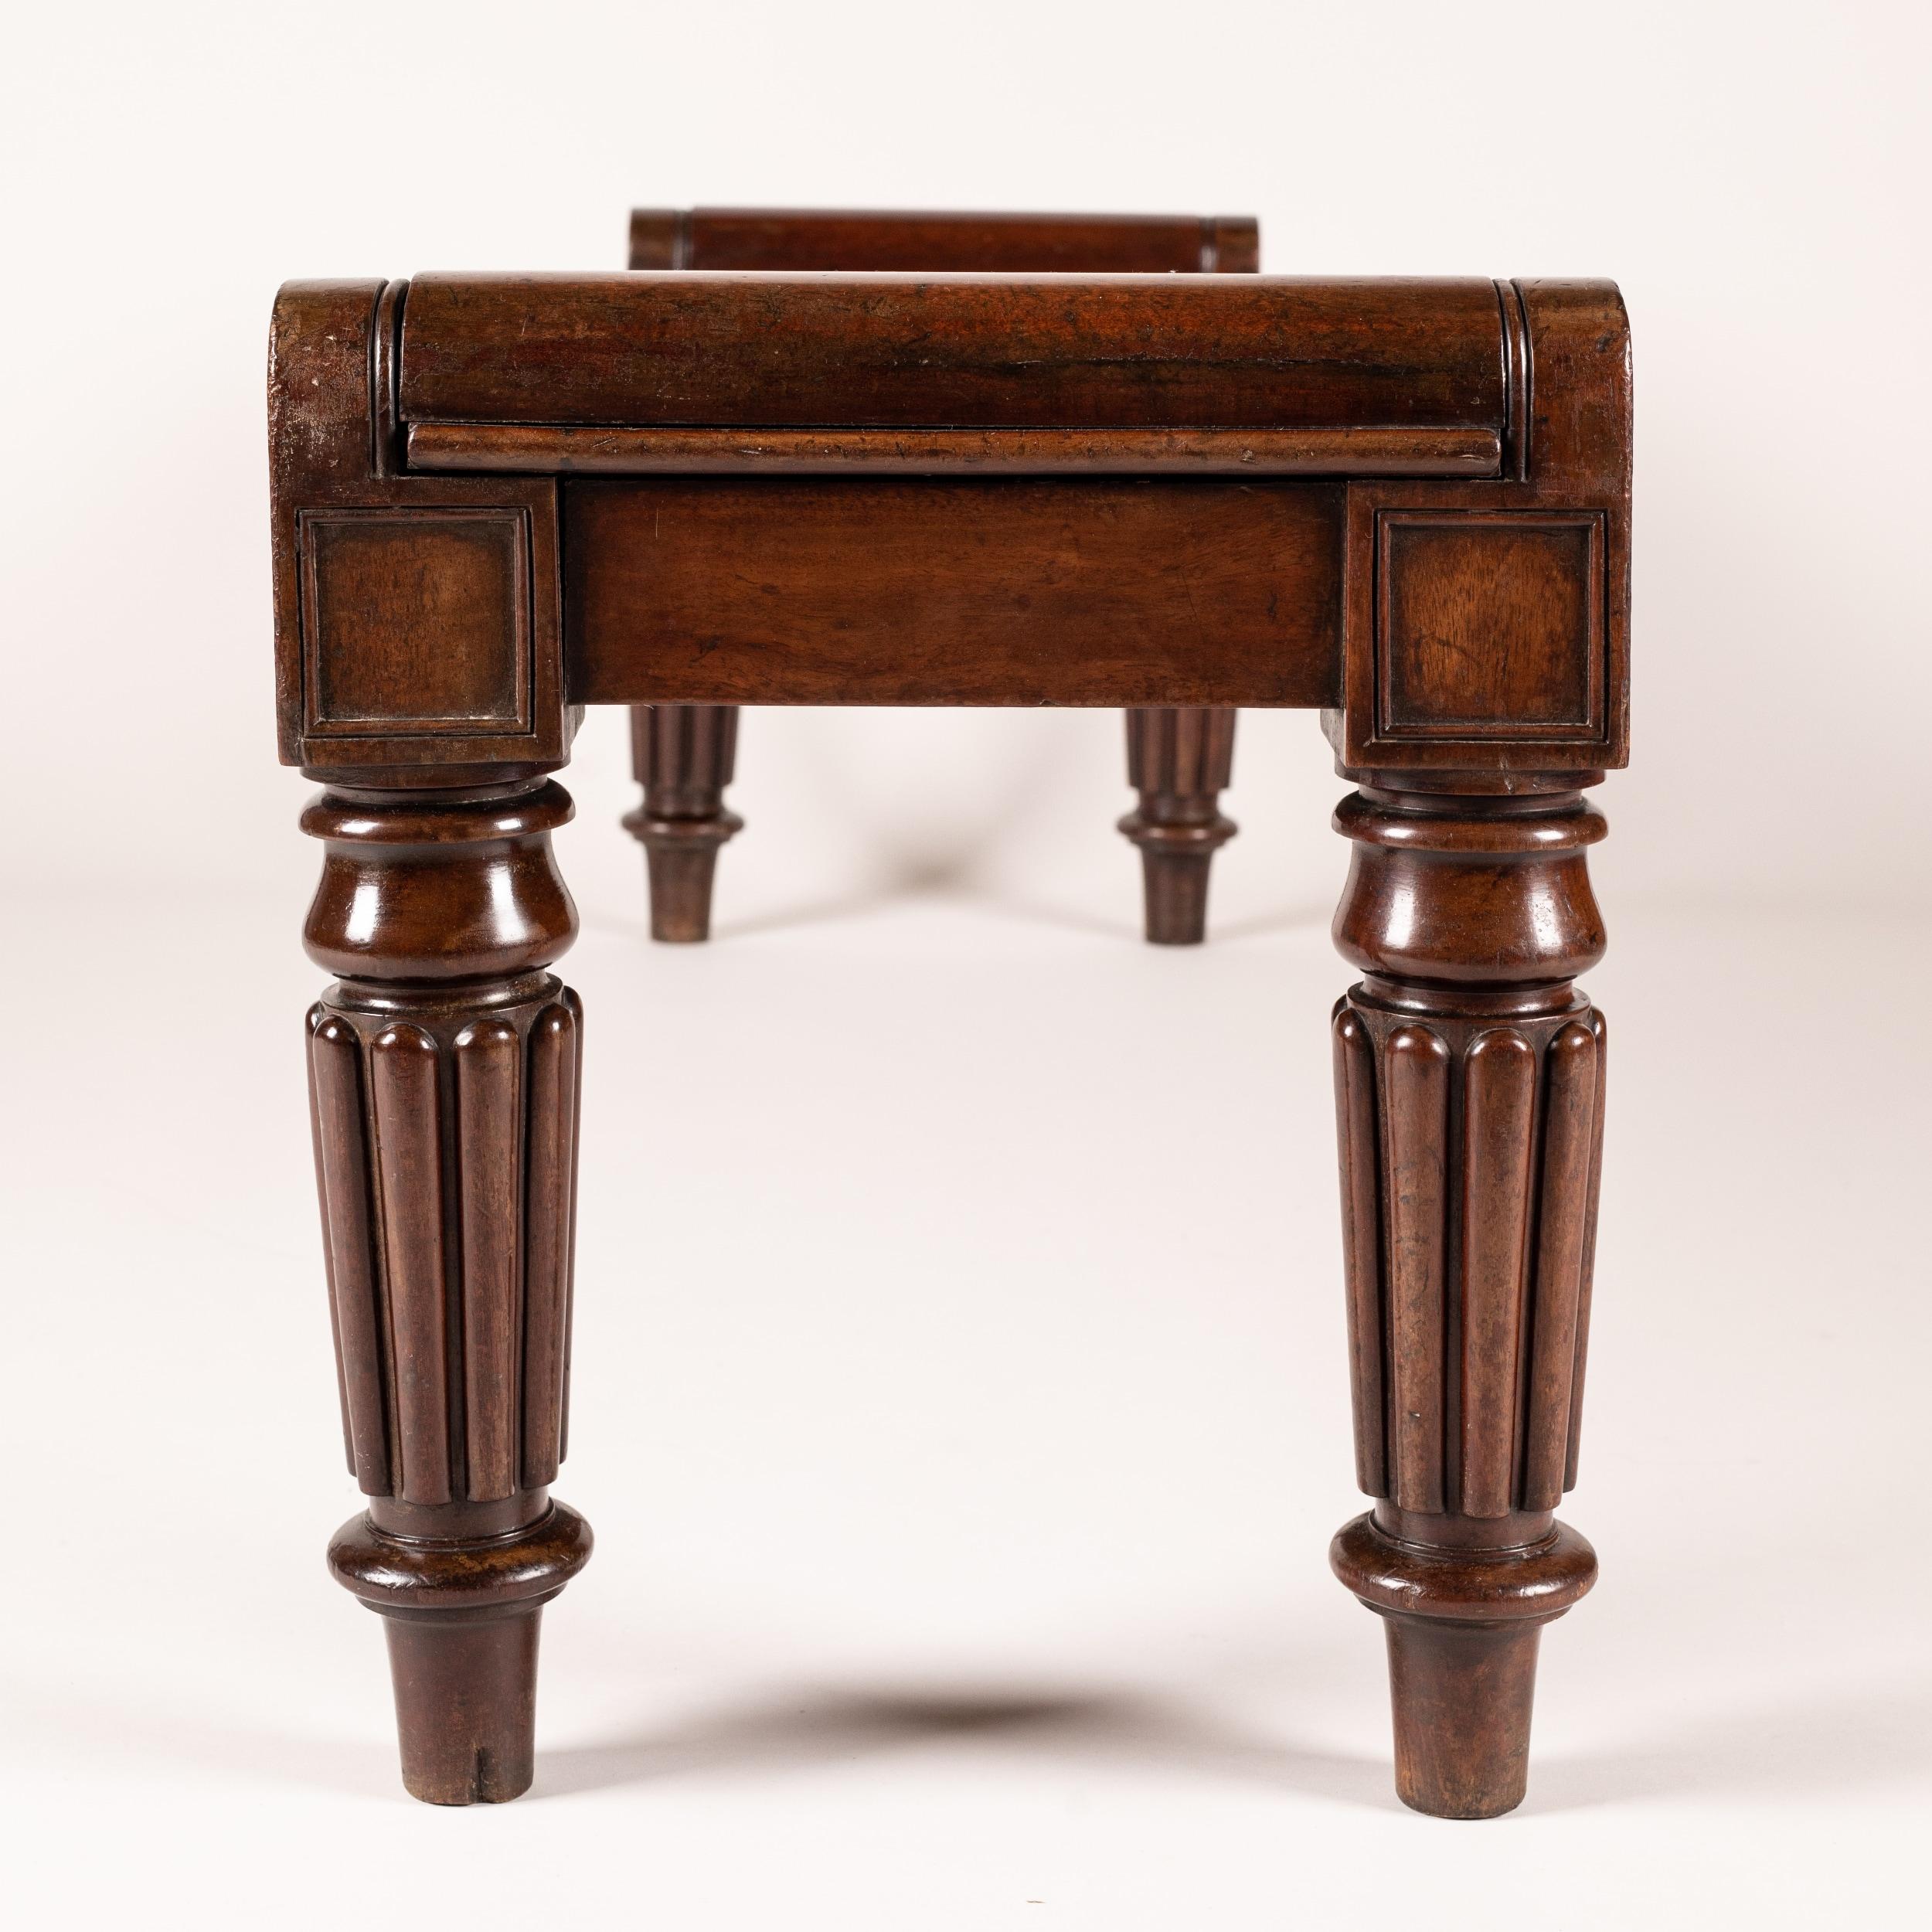 19th Century Late Georgian Solid Mahogany Bench with Carved Legs